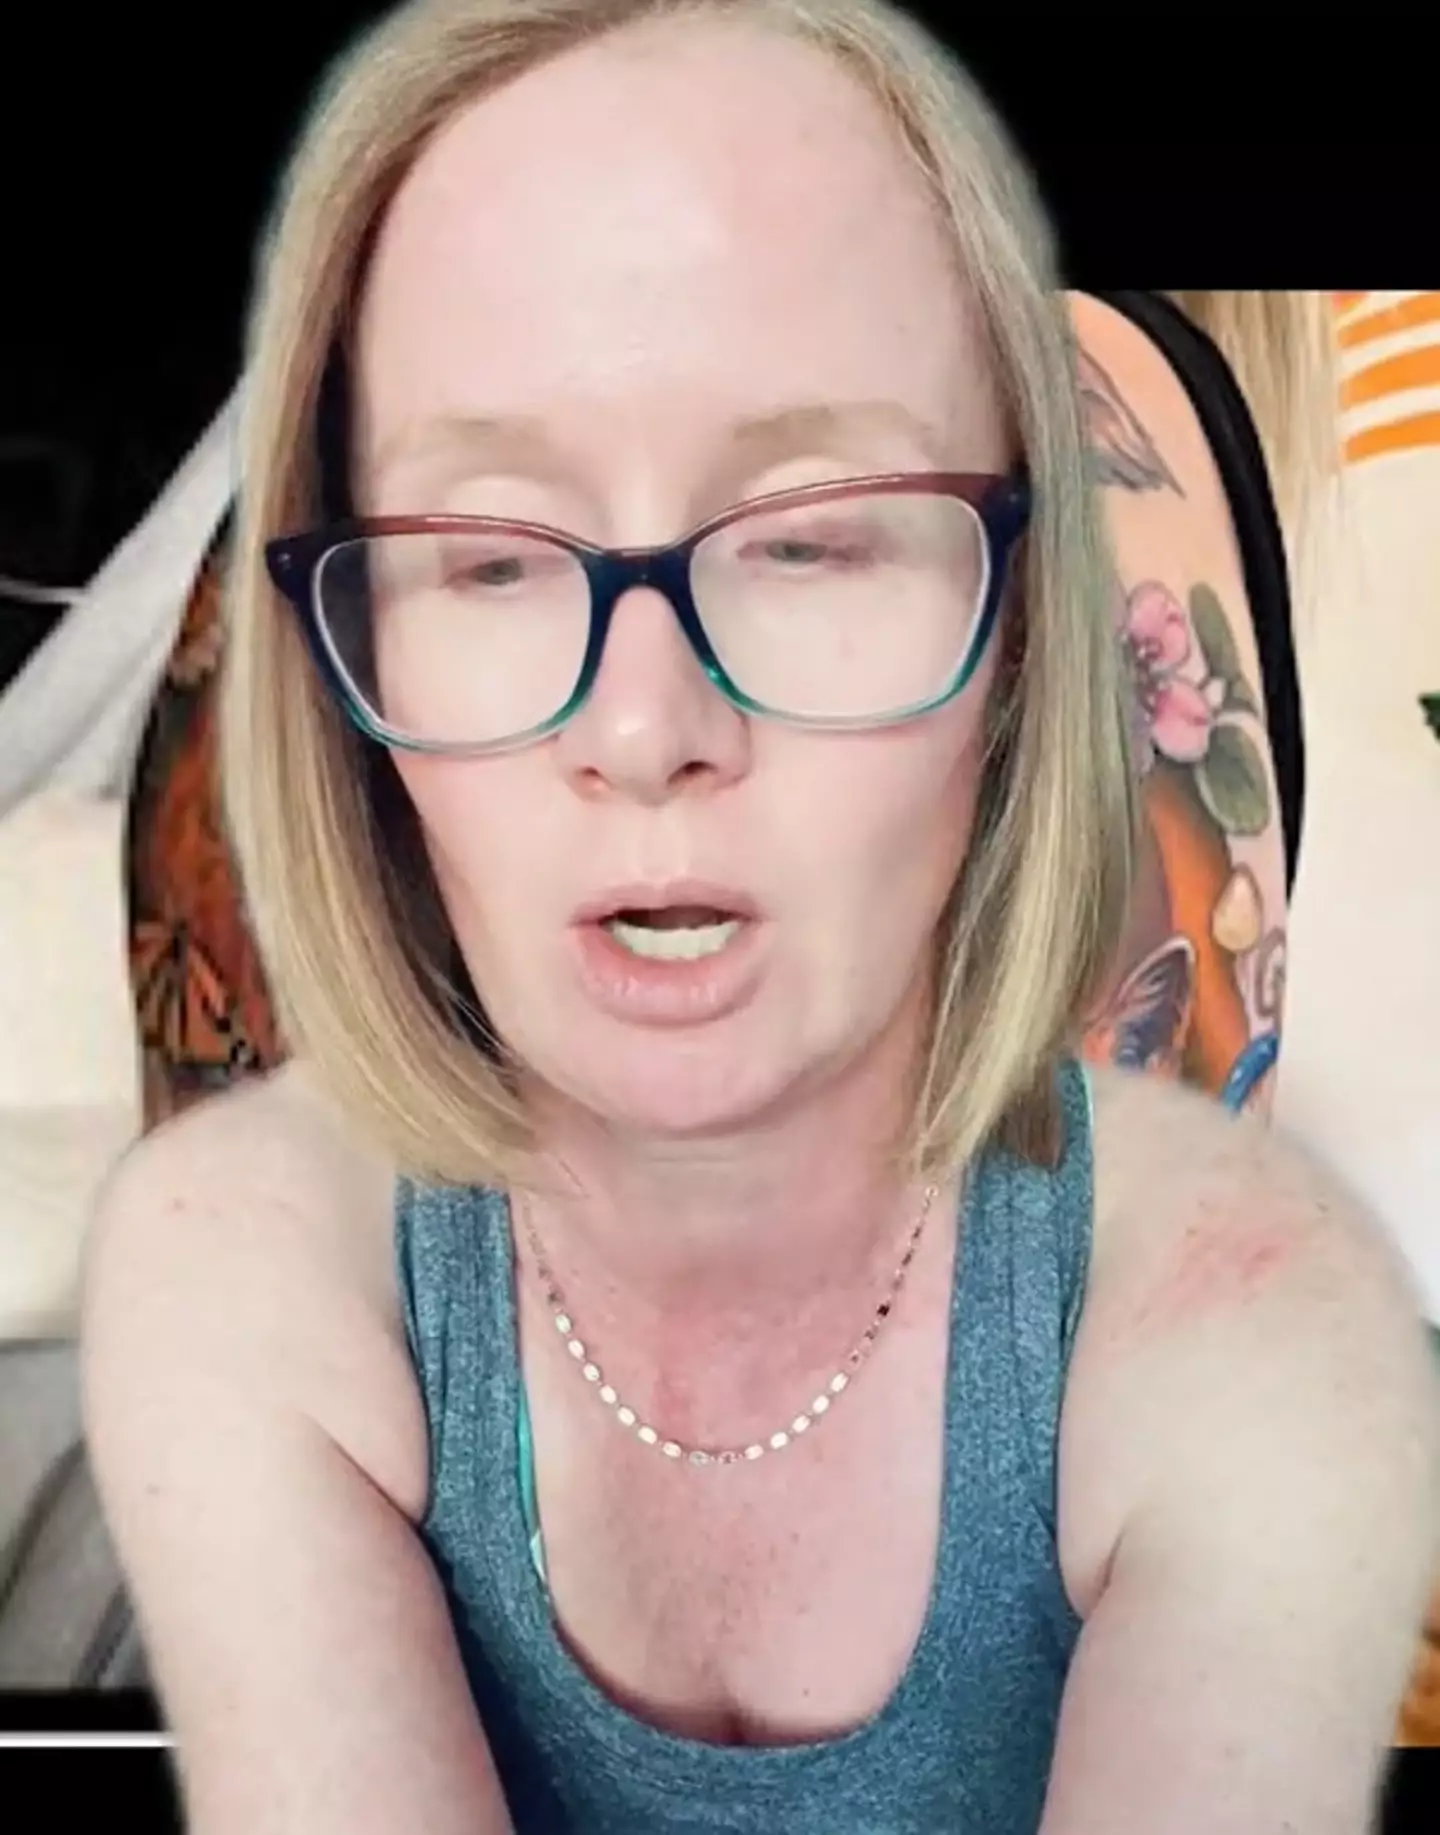 Courtney said she paid over $2,600 for a tattoo she never got and her story went viral.